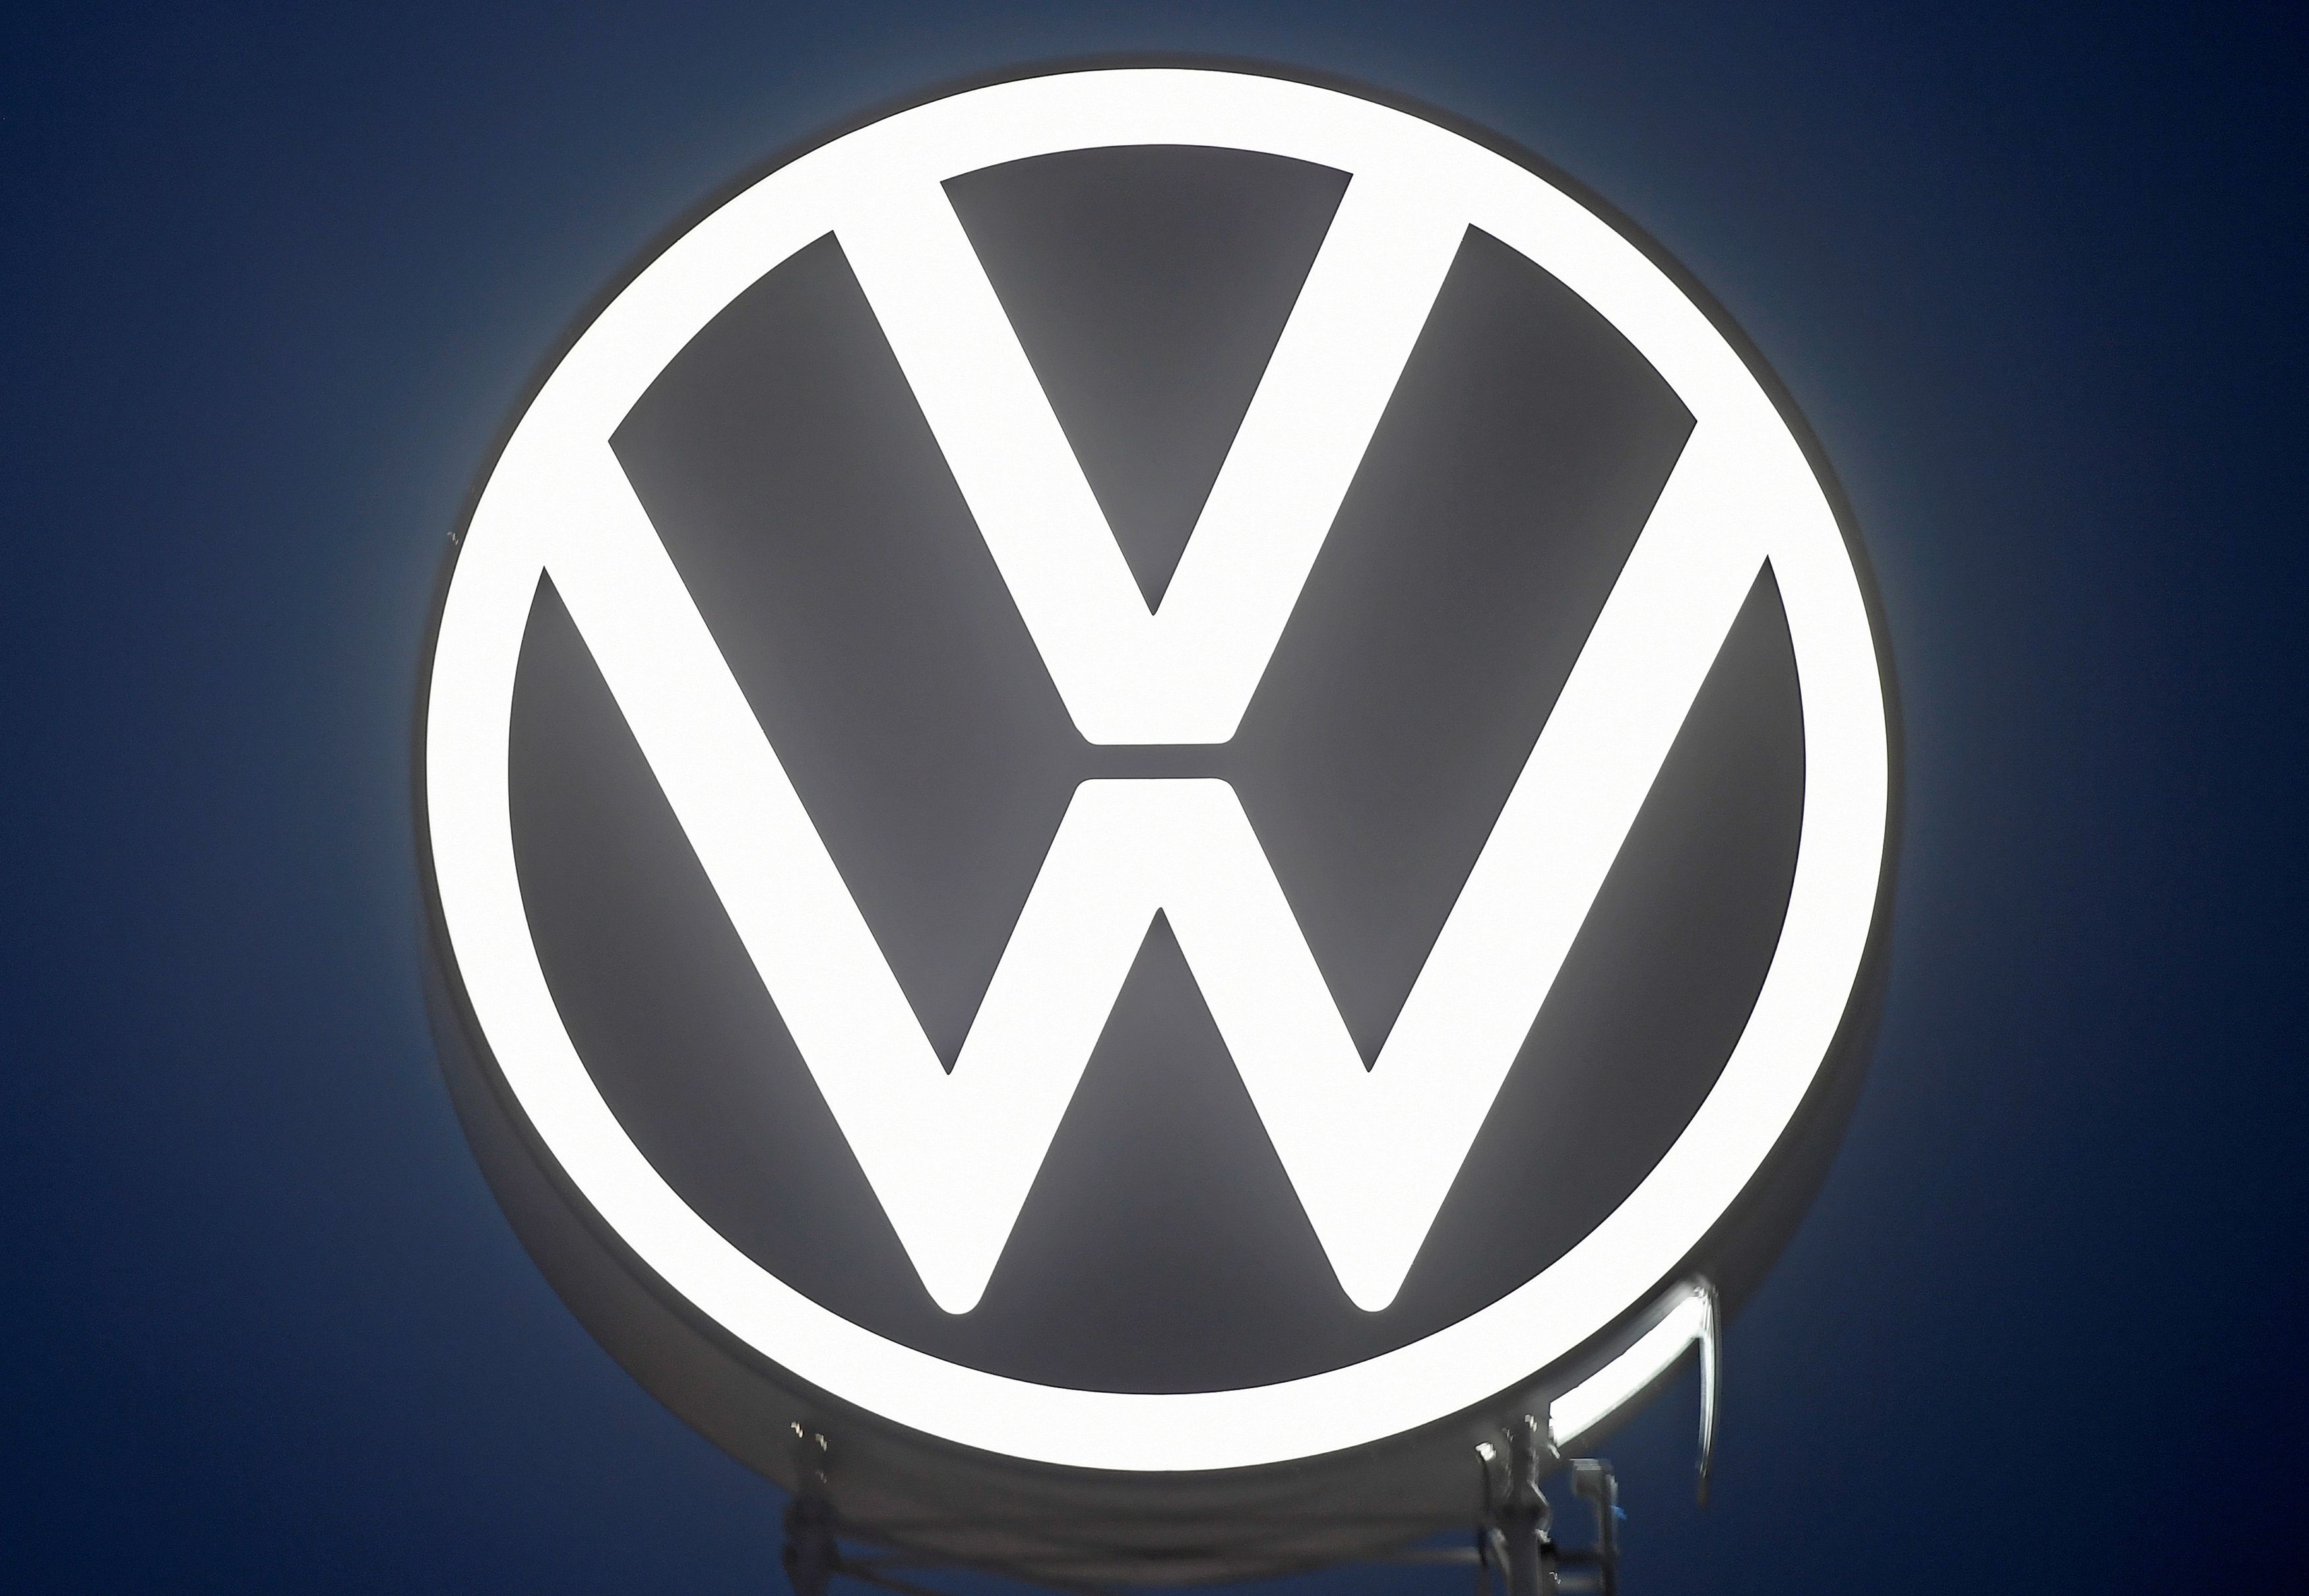 A new logo of German carmaker Volkswagen is unveiled at the VW headquarters in Wolfsburg